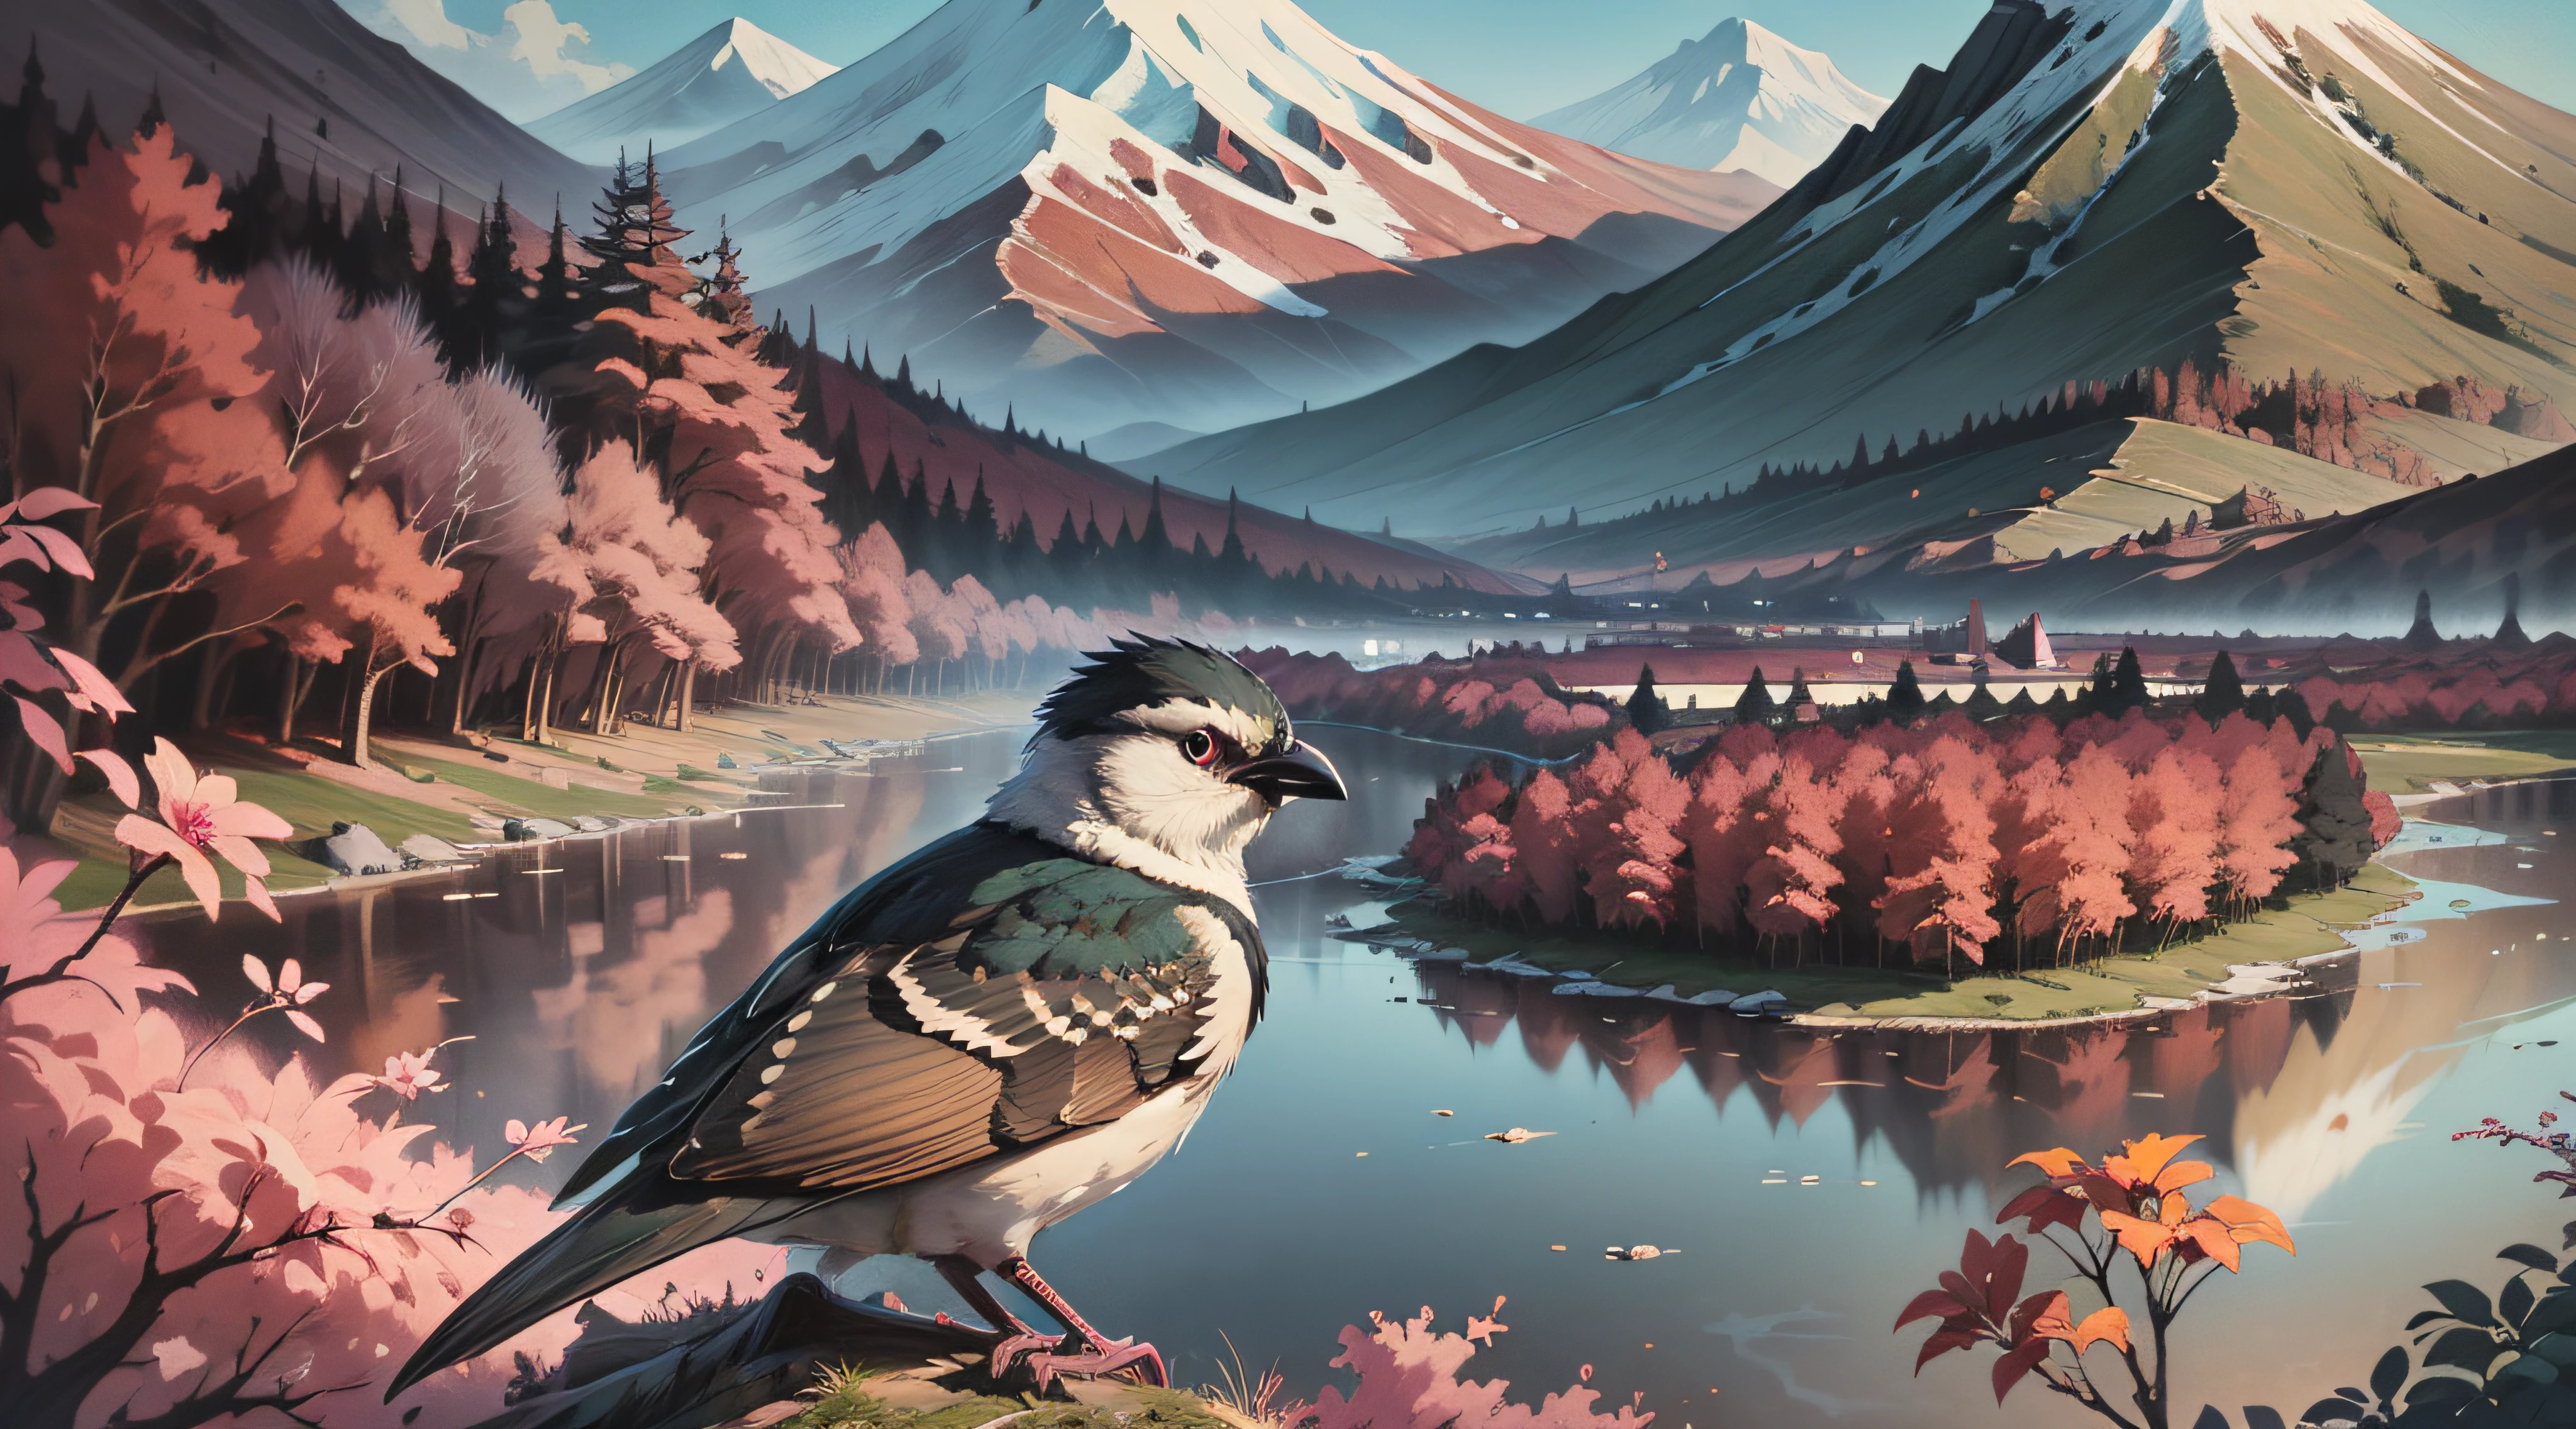 there is a bird that is sitting on a stick in the grass, concept art inspired by Josetsu, pixiv contest winner, shin hanga, anime nature wallpaper, hold sword in the forest, anime nature, anime countryside landscape, detailed key anime art, heroine japan vivid landscape, anime landscape wallpaper, dojo on a mountain, japan nature, mount fuji background